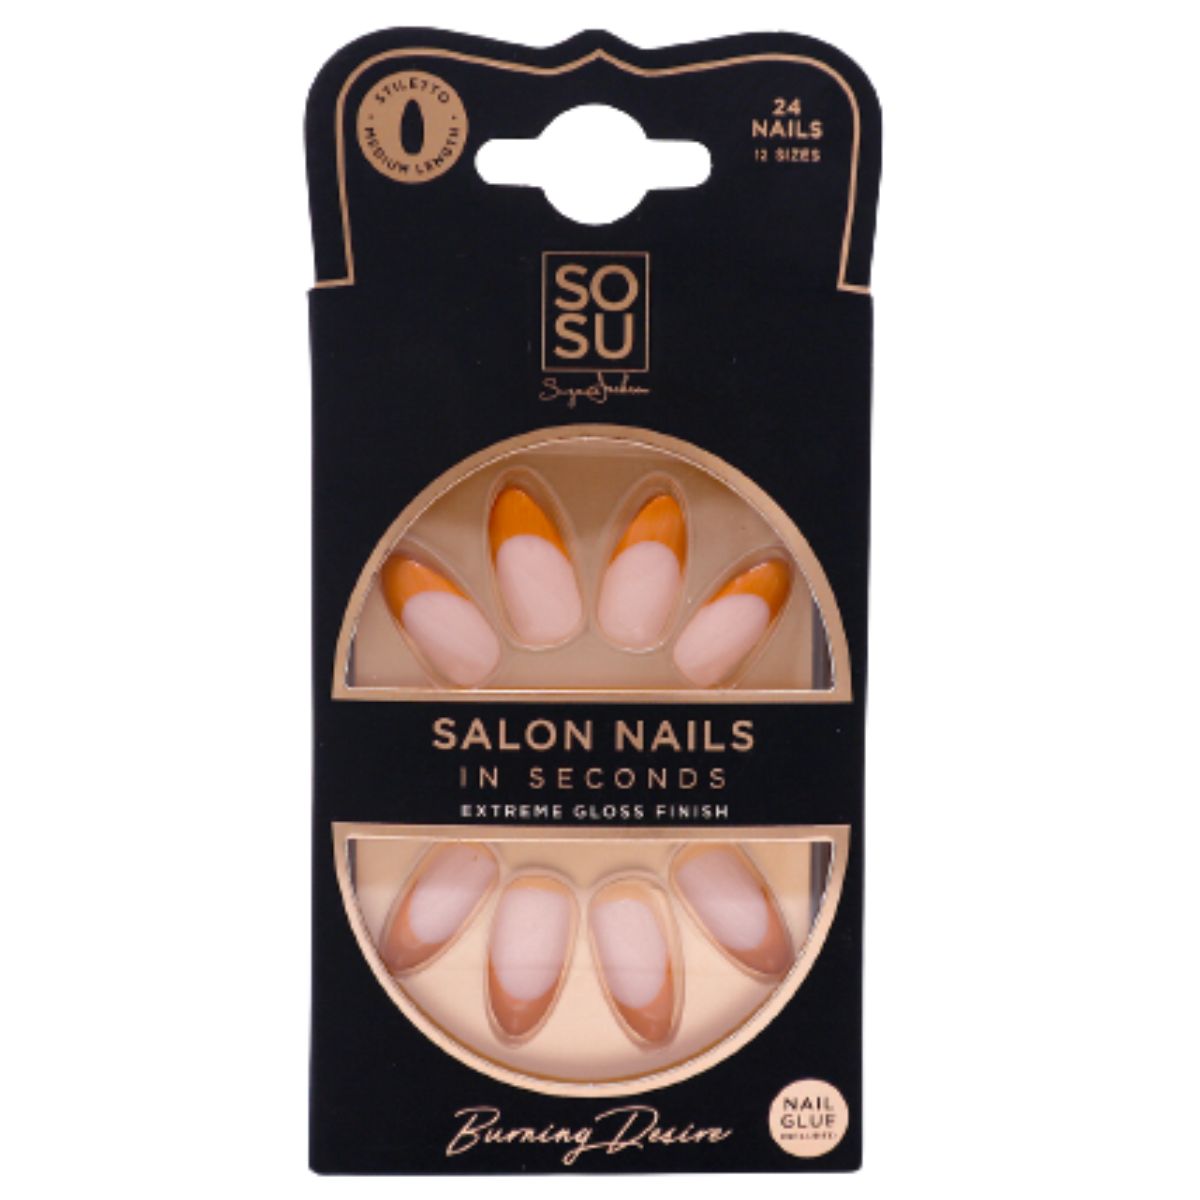 SOSU Cosmetics Salon Nails in Seconds with Nail Glue